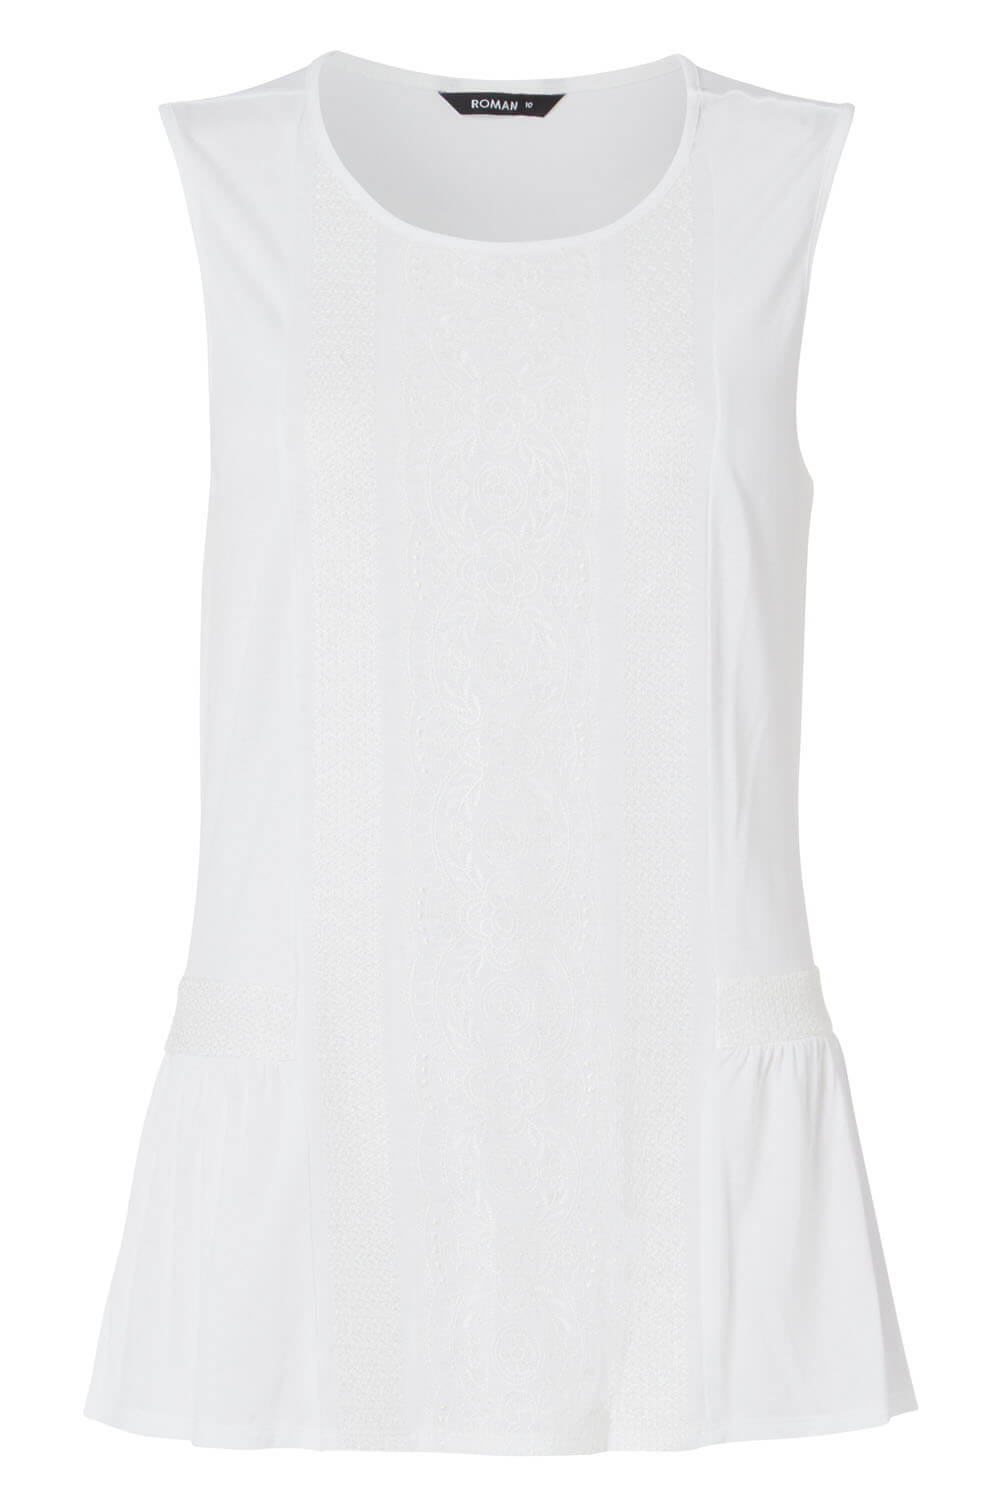 Ivory  Sleeveless Embroidered Front Top, Image 4 of 4